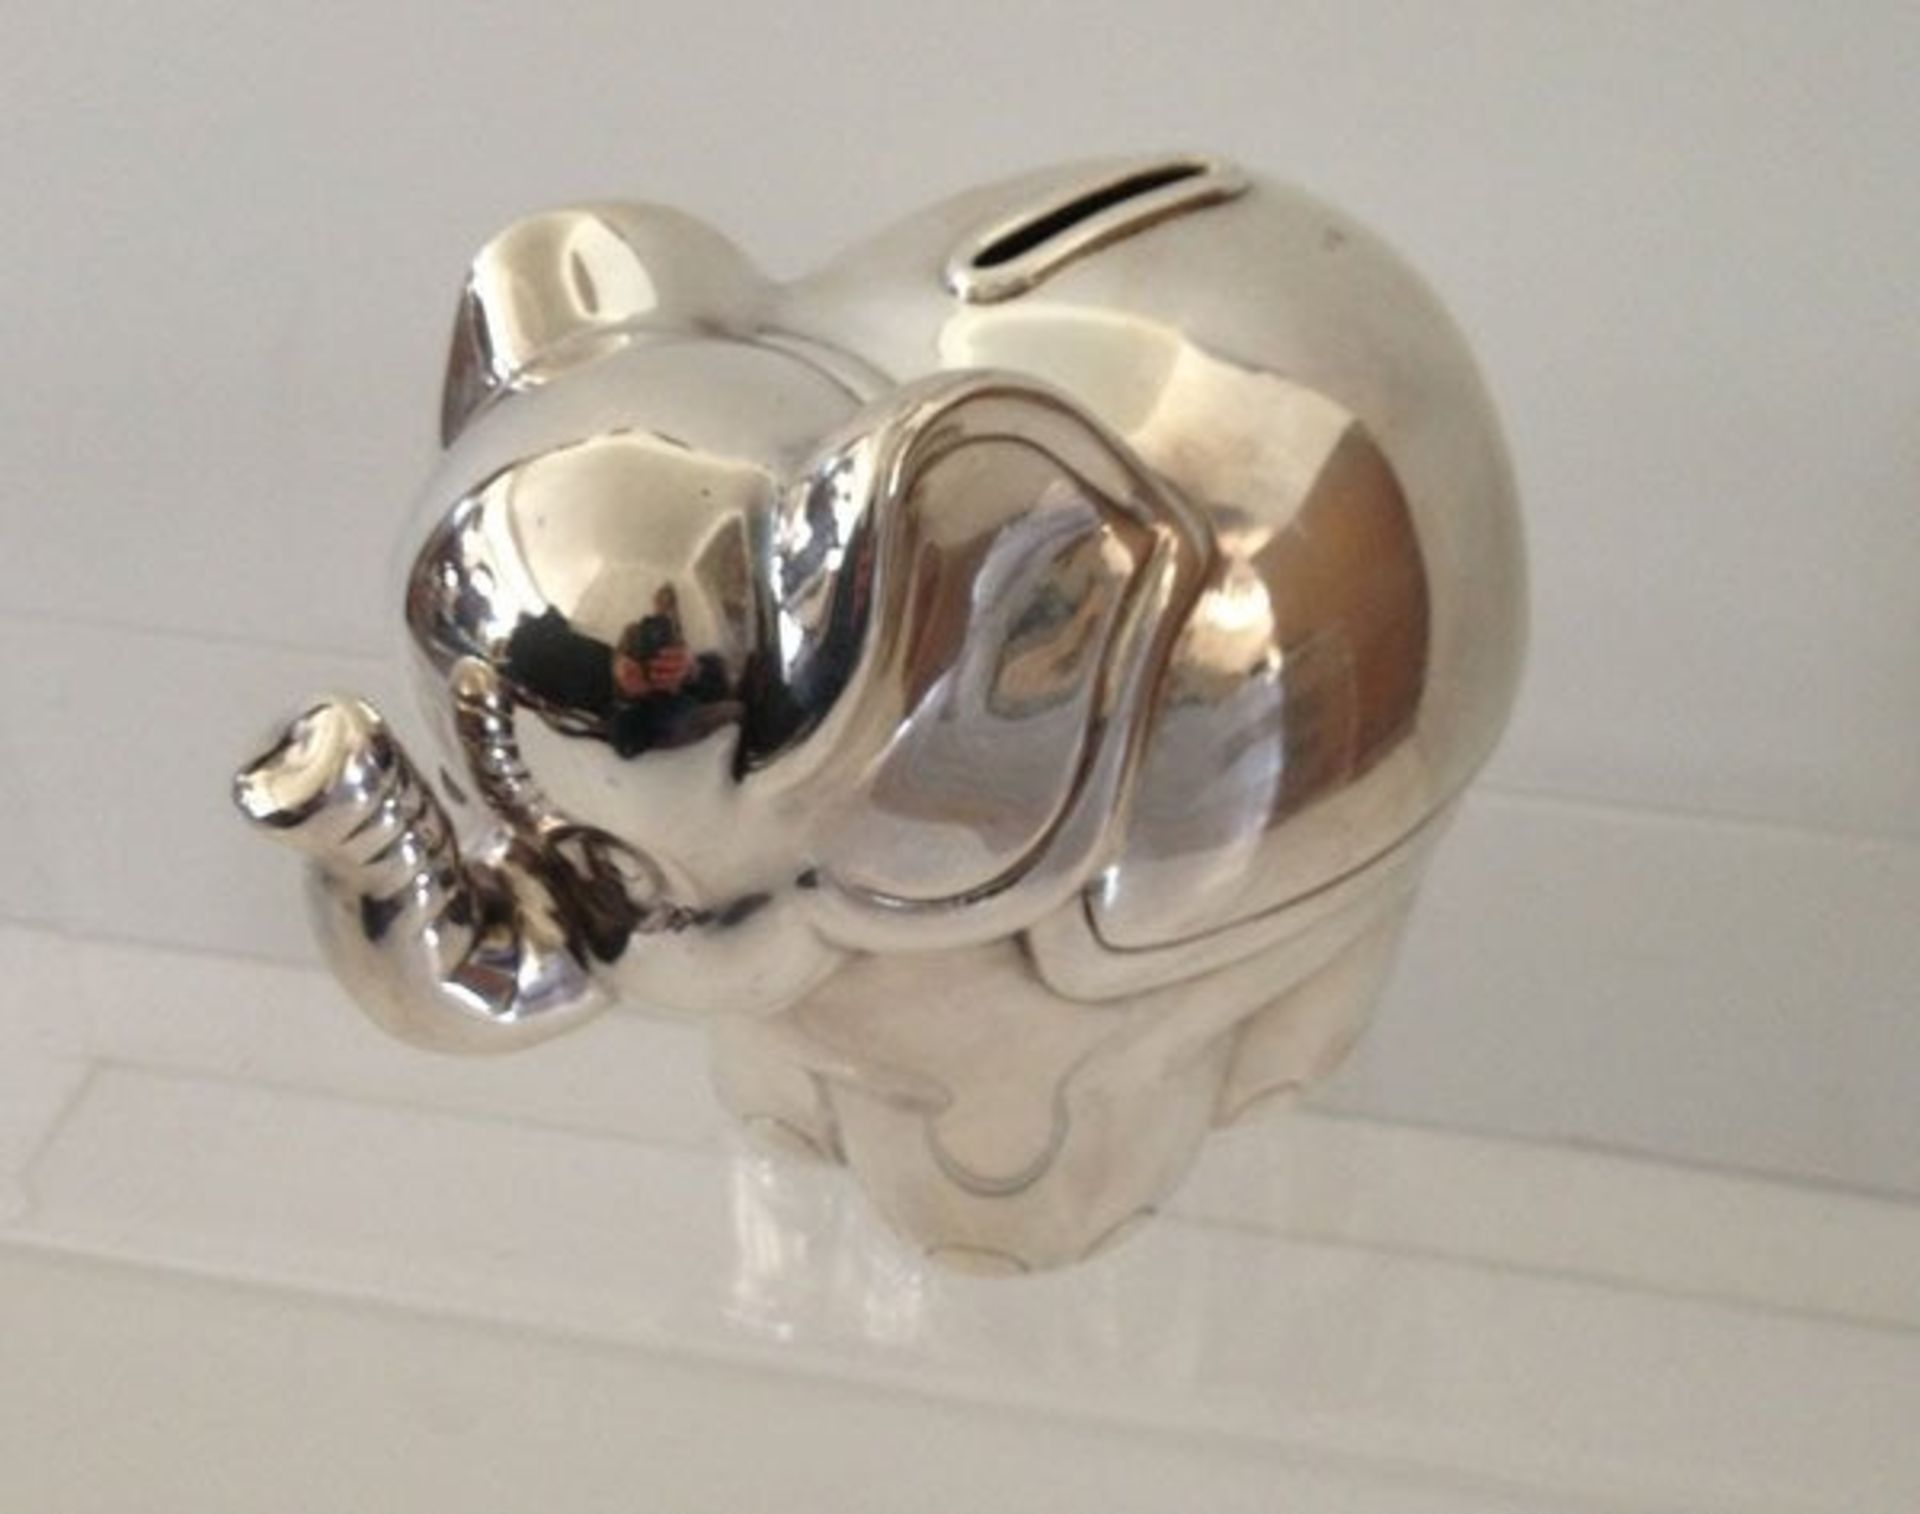 Tiffany Rare Solid Silver Elephant Piggy Bank - Image 3 of 6